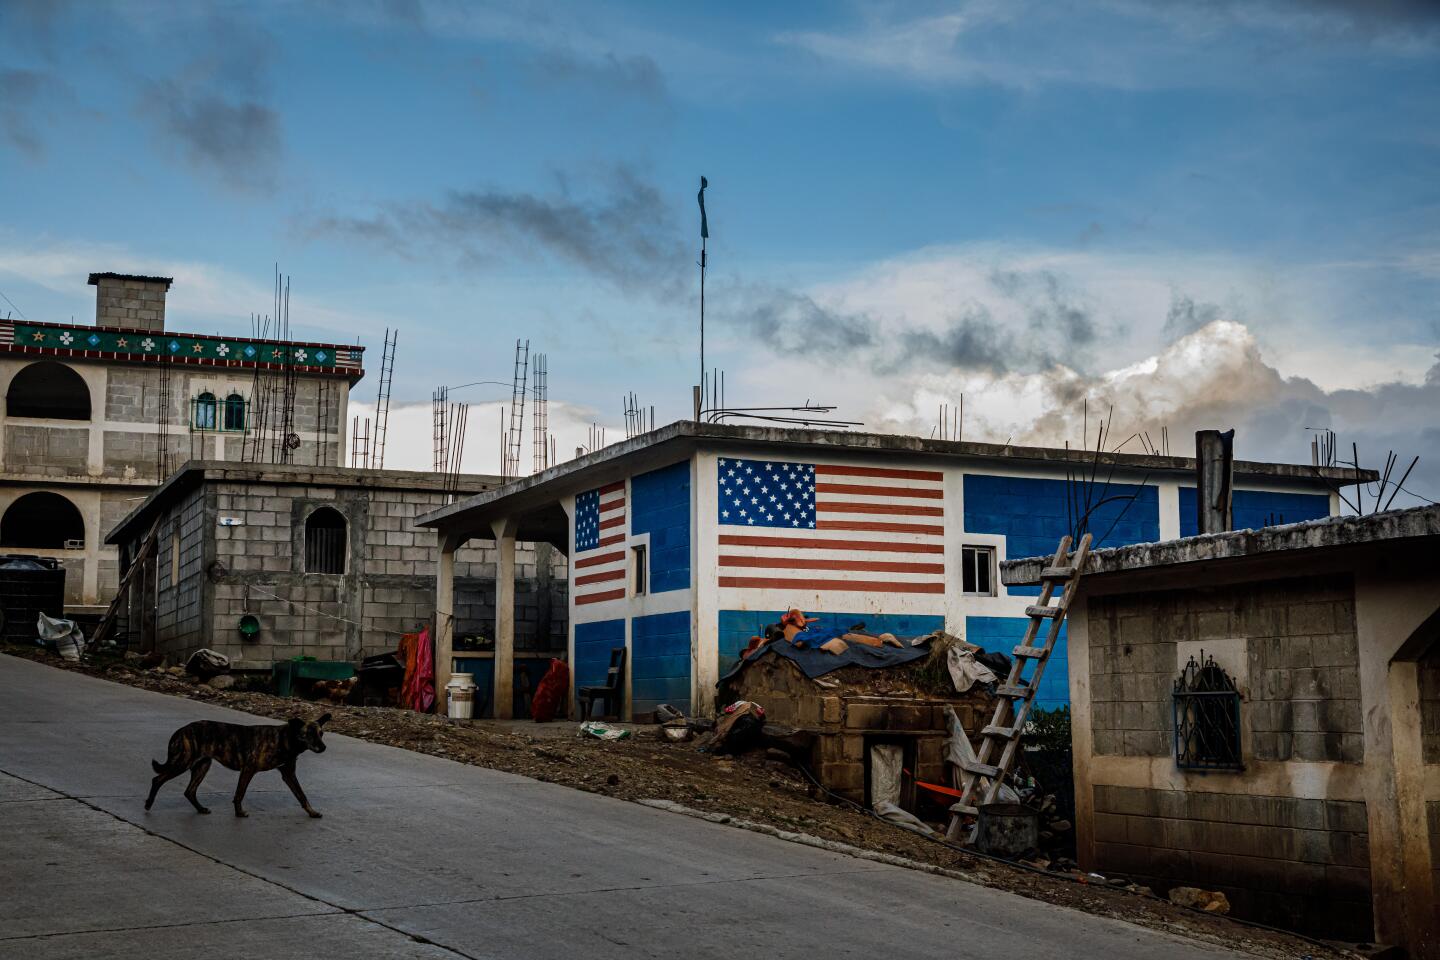 TODOS SANTOS CUCHUMAT?N, DEPARTMENT OF HUEHUETENANGO -- TUESDAY, JUNE 25, 2019: A dog walks by a home decorated with the American flag painted on its walls, near Todos Santos Cuchumat?n, Guatemala, on June 25, 2019. (Marcus Yam / Los Angeles Times)